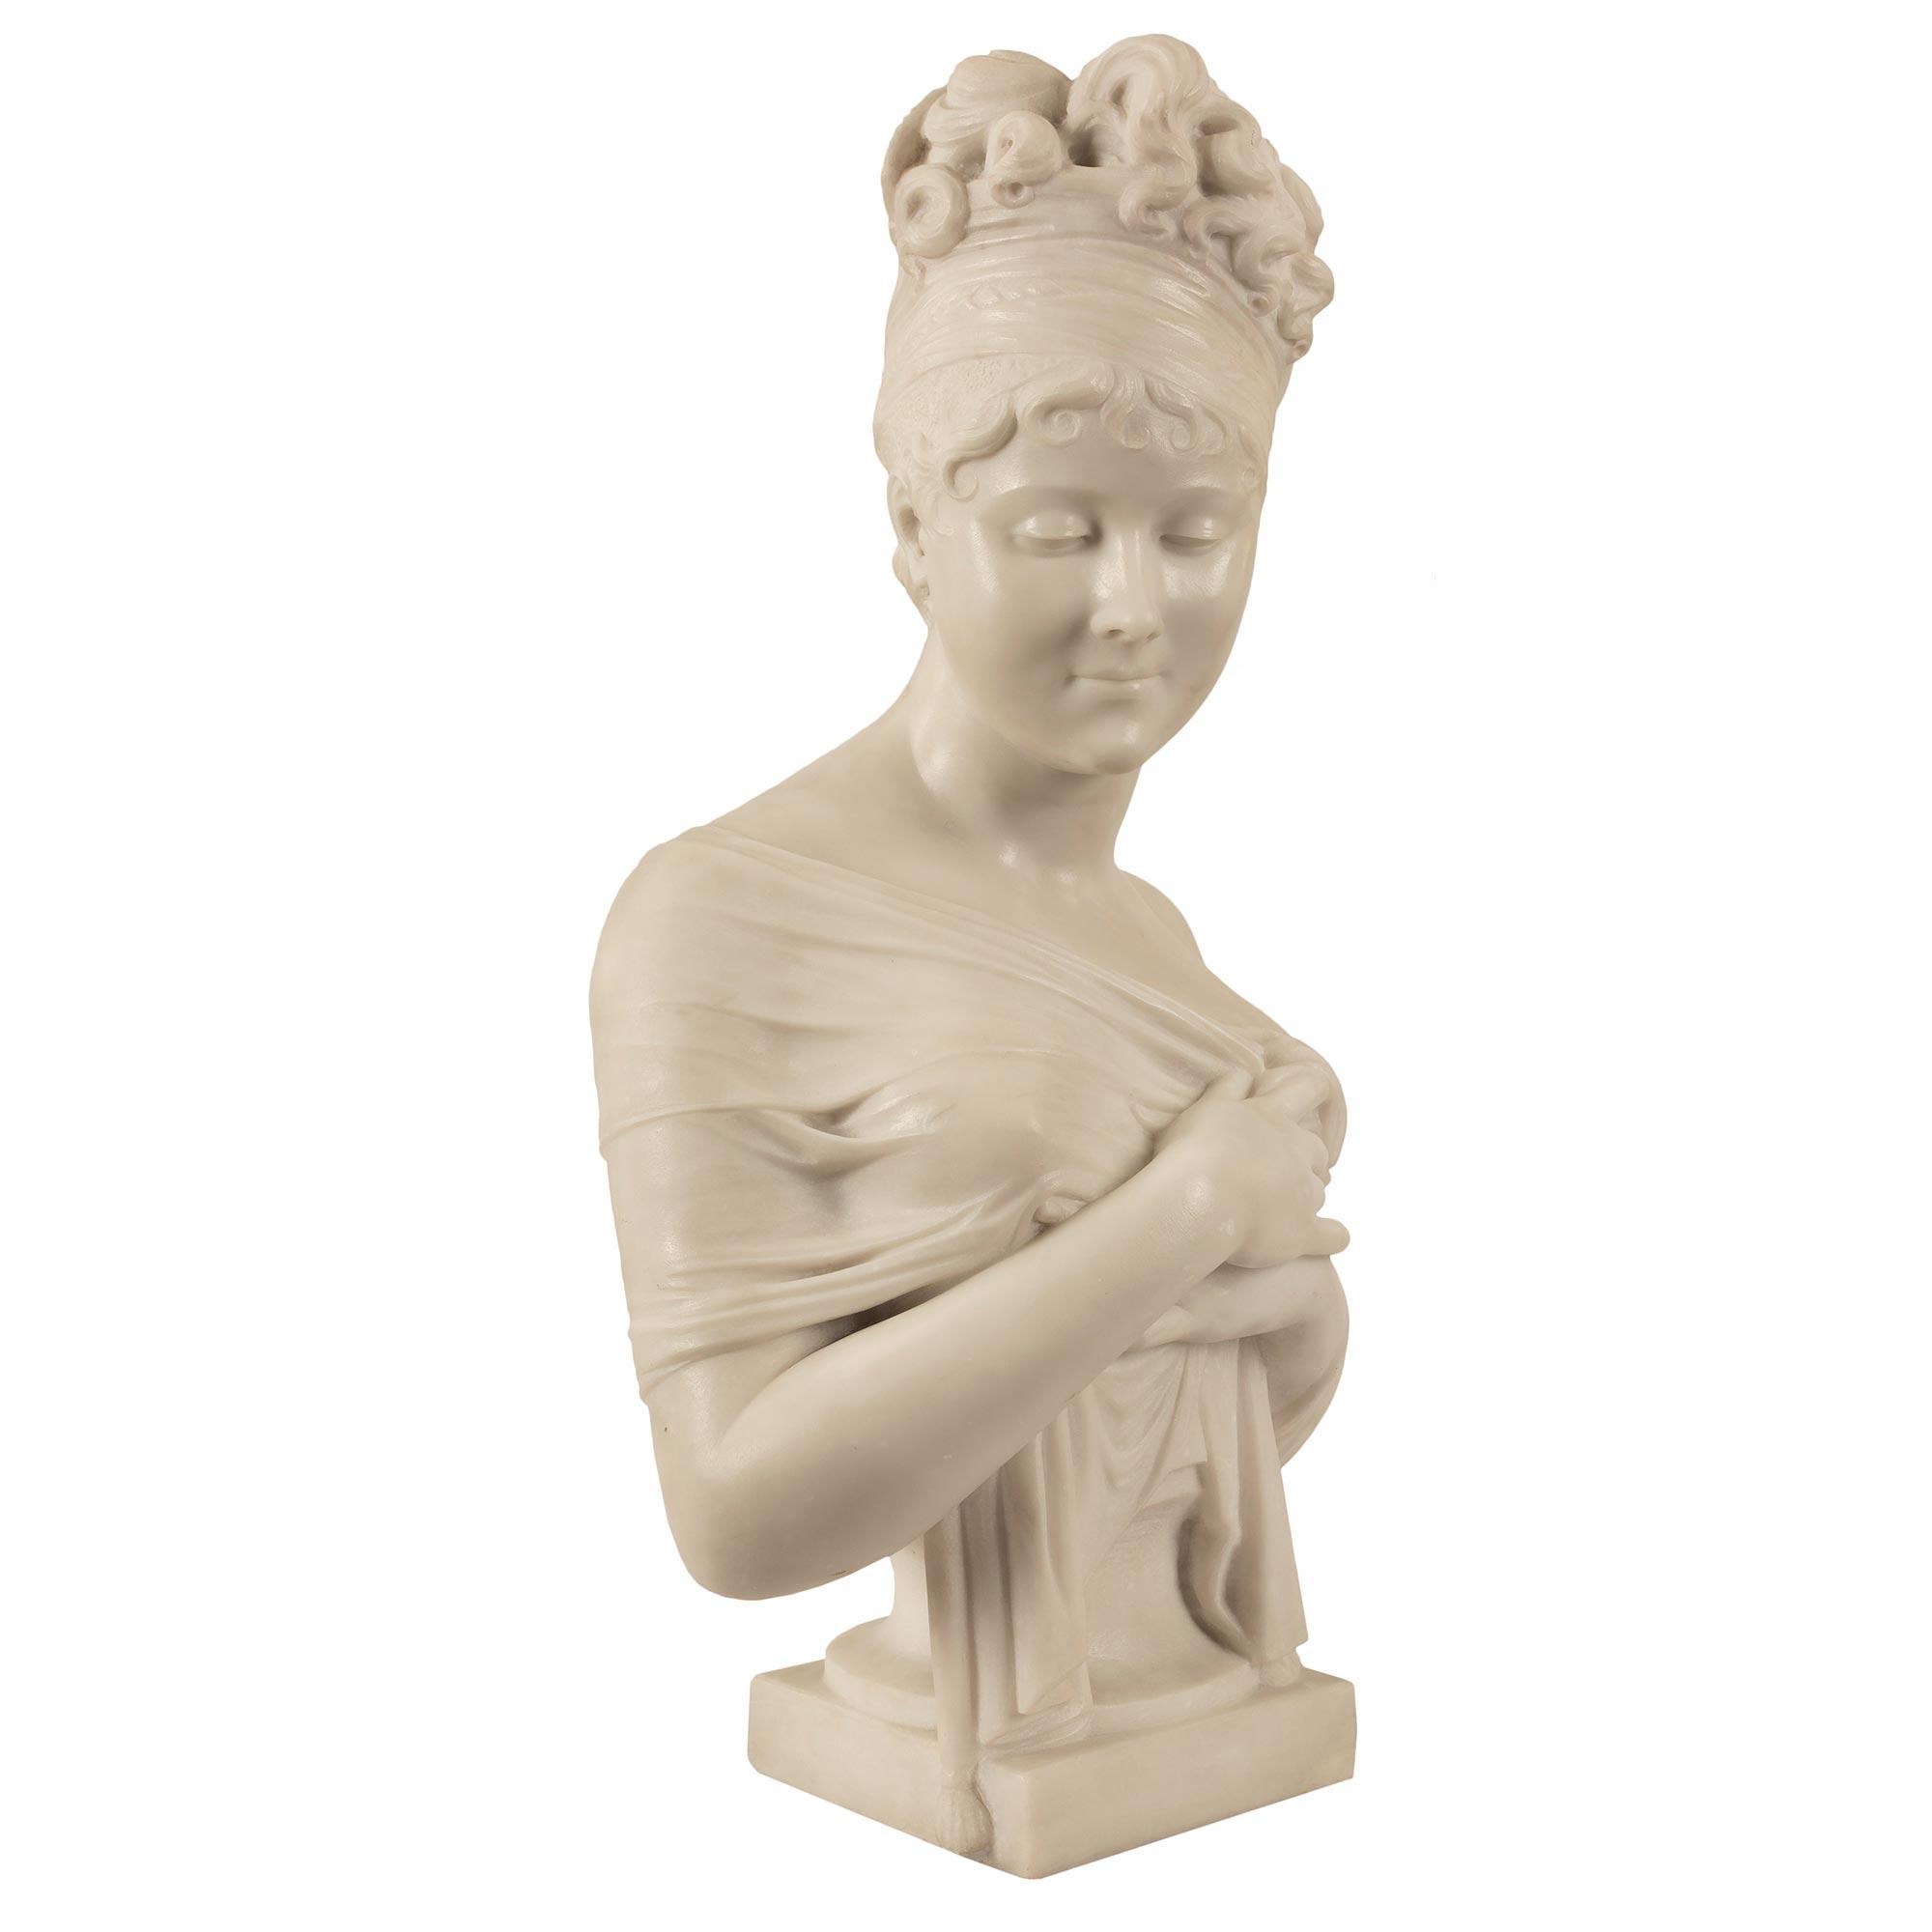 A beautiful and wonderfully executed Italian 19th century Neo-Classical st. white Carrara marble bust of young Madame Juliette Recamier. The bust is raised by a square base below the charming and extremely elegant Juliette. She is holding up her